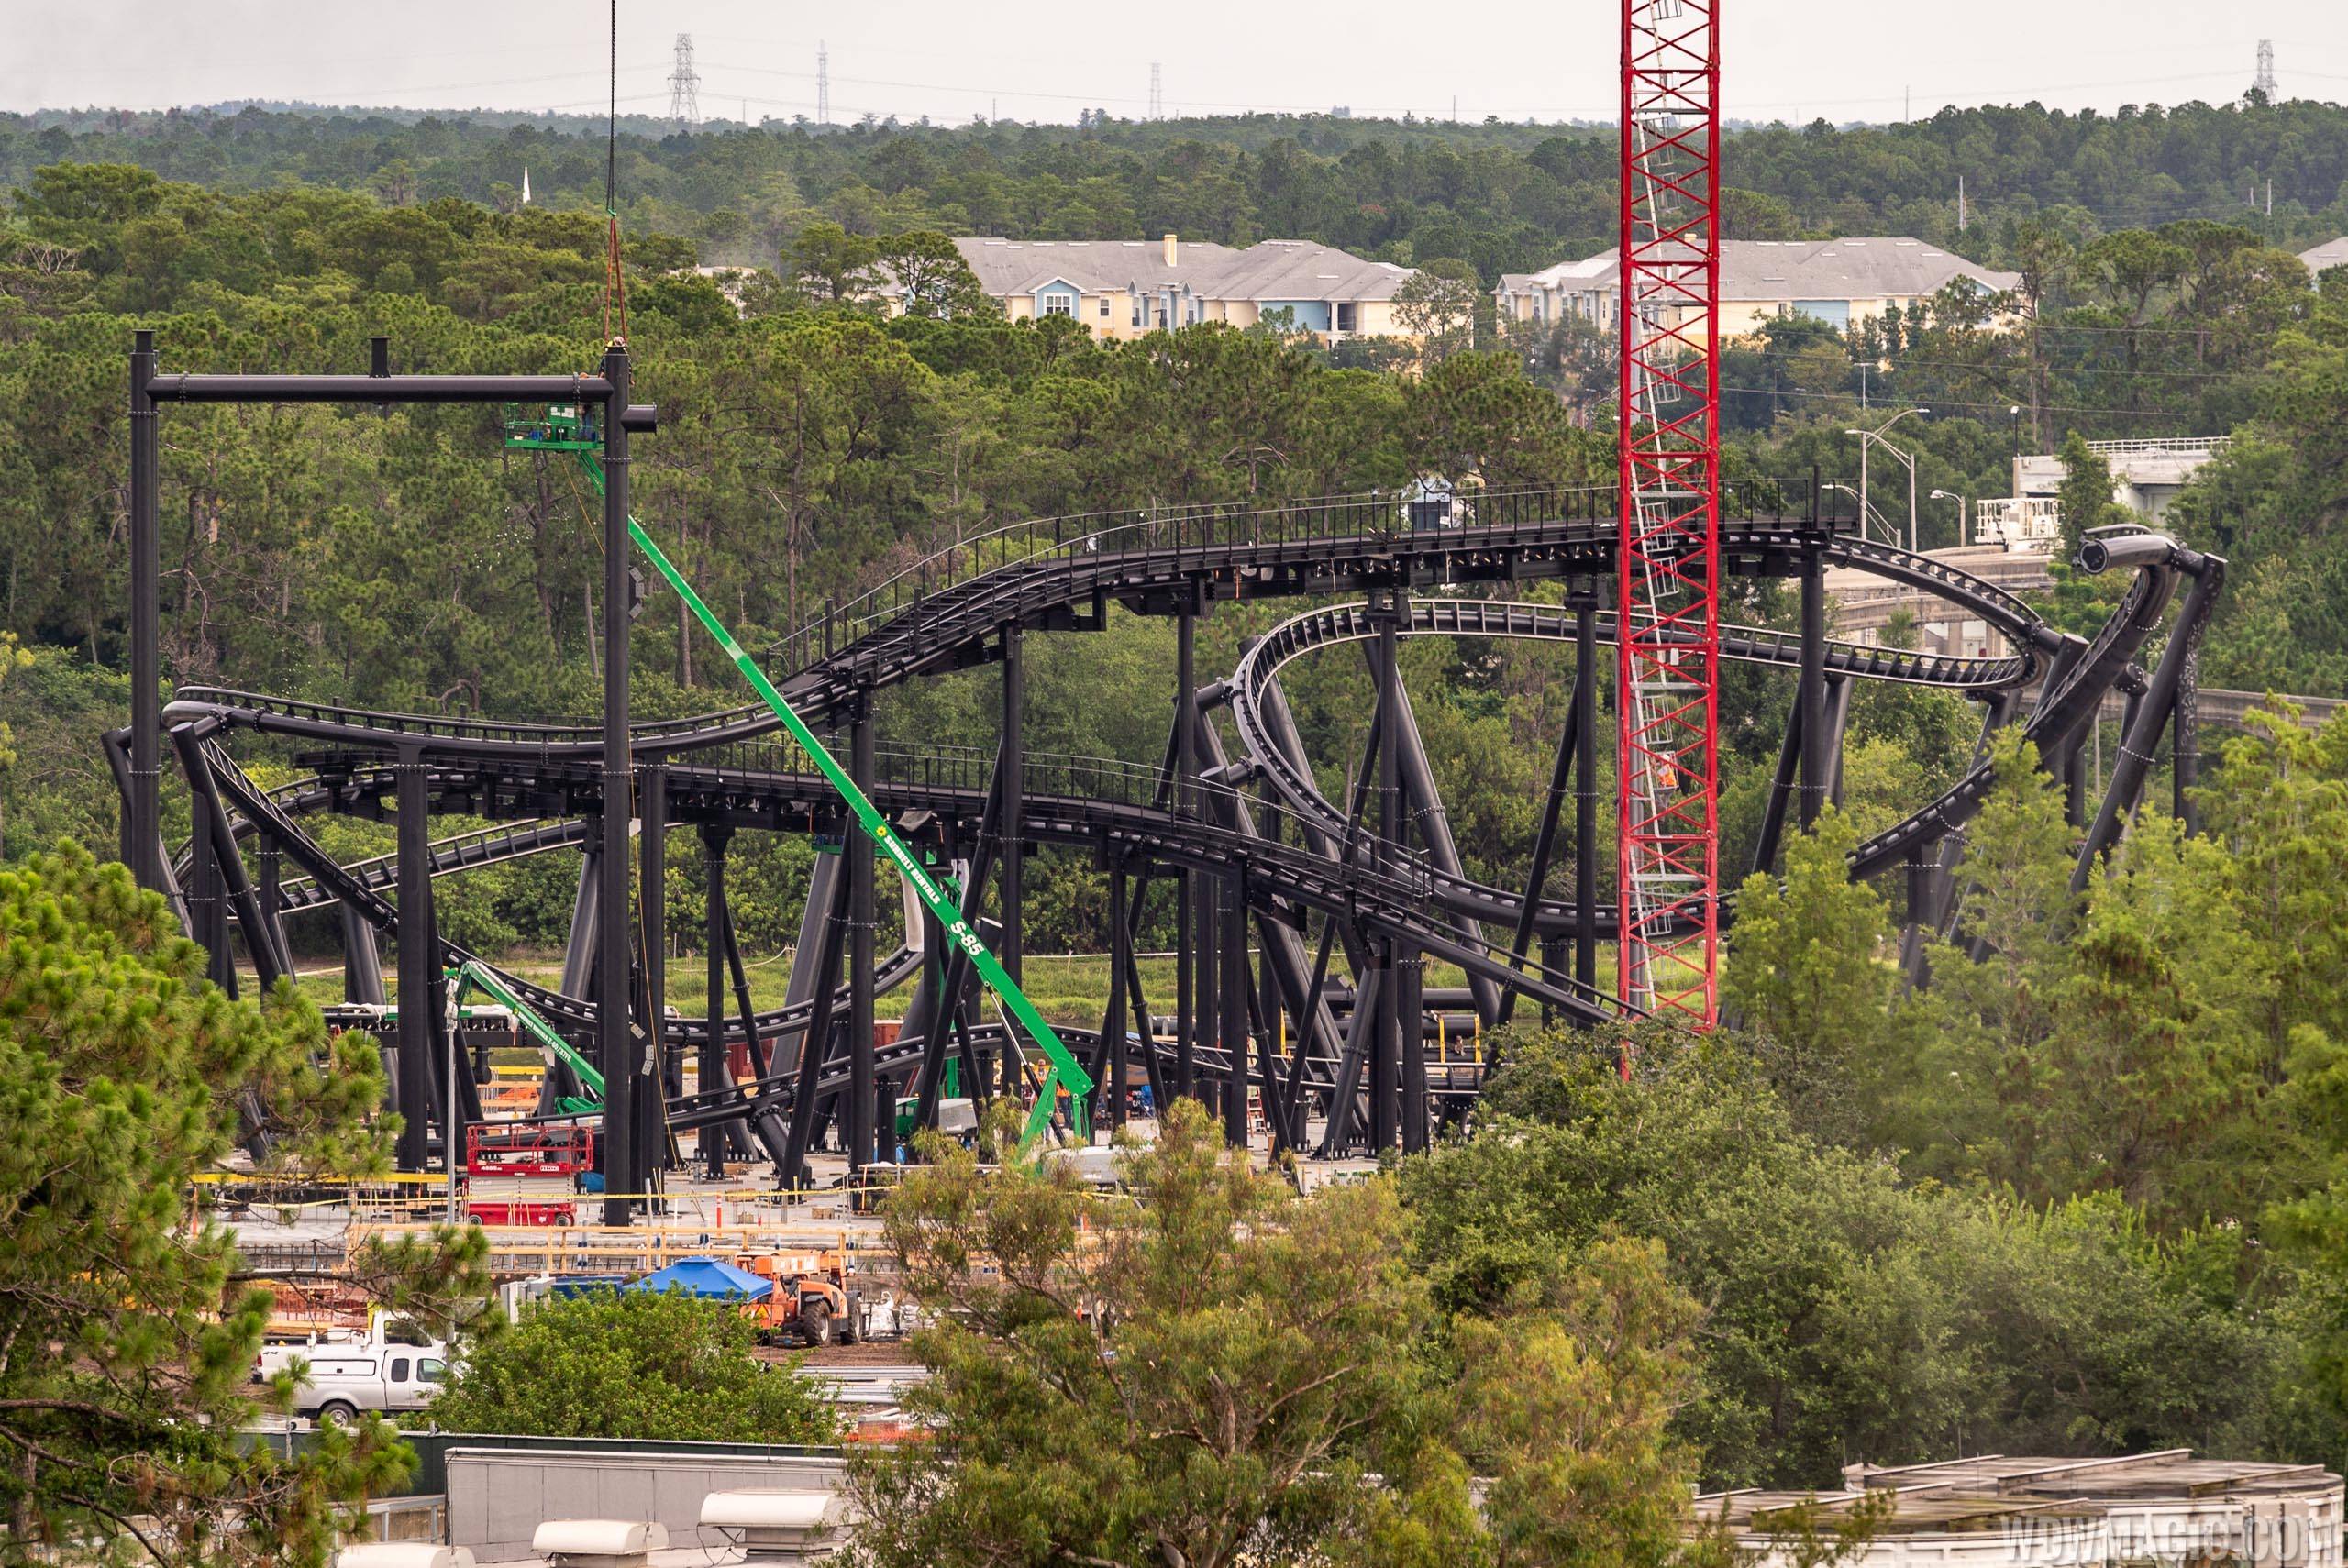 PHOTO - Latest look at the TRON coaster track installation